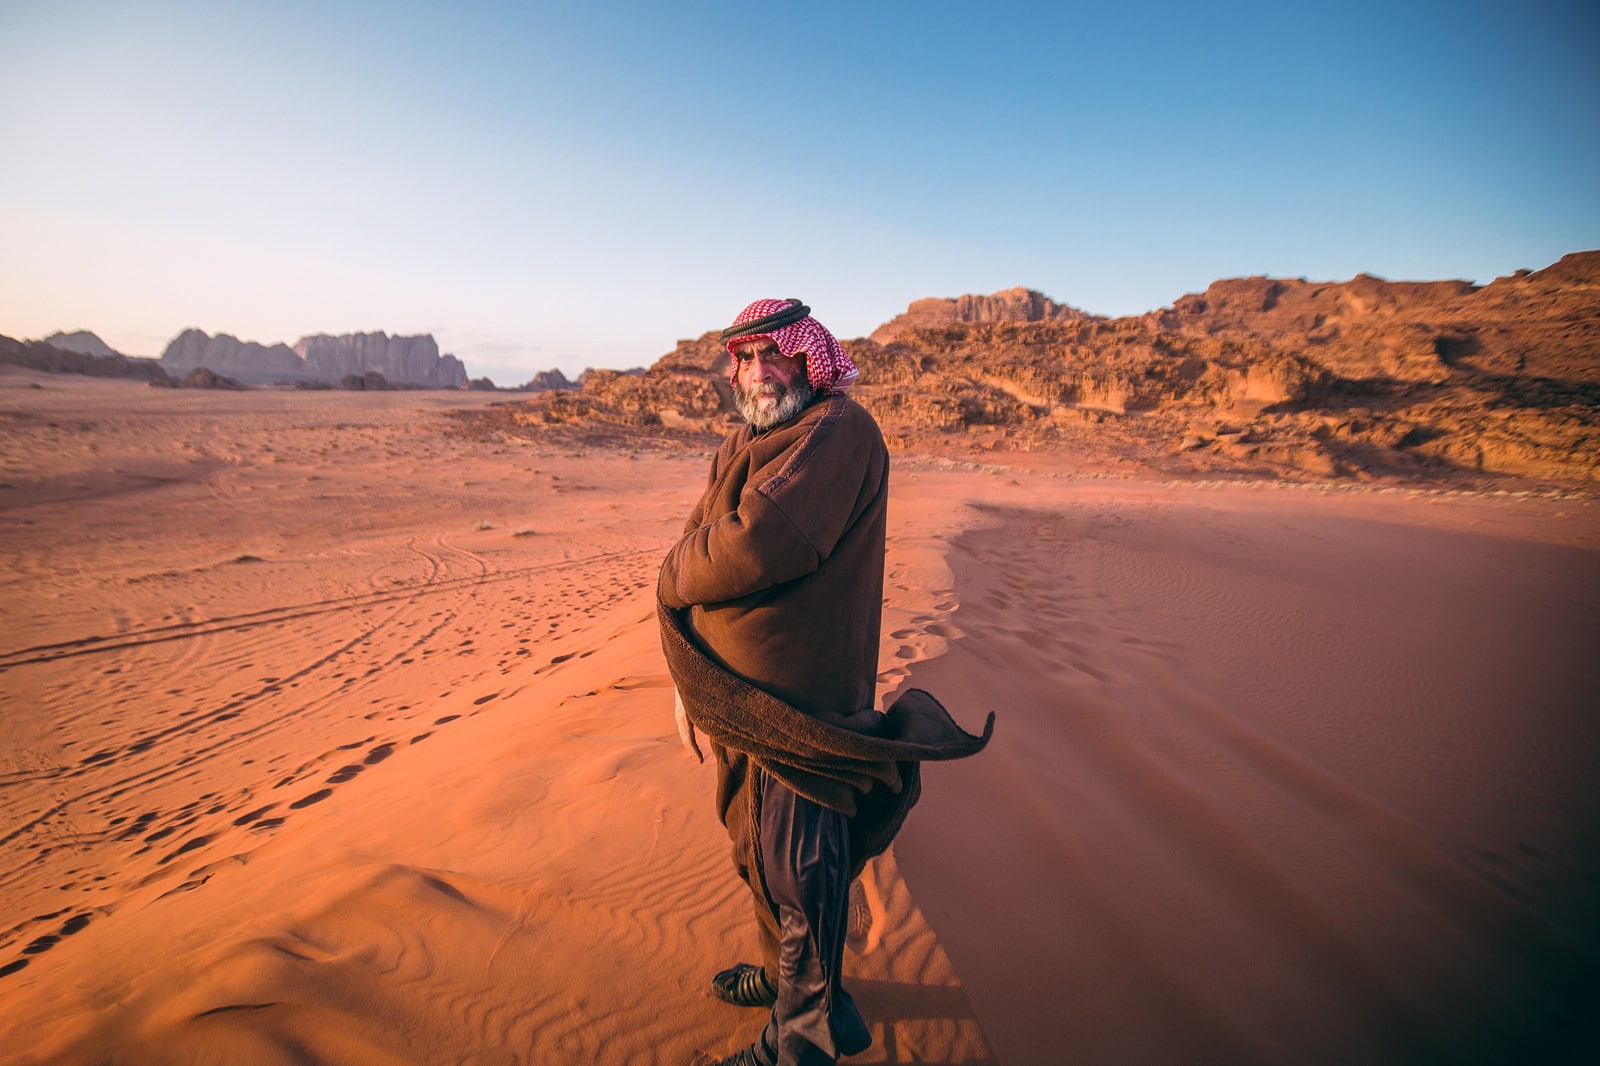 Arabic, desert, one person, clothing, real people, sky, landscape